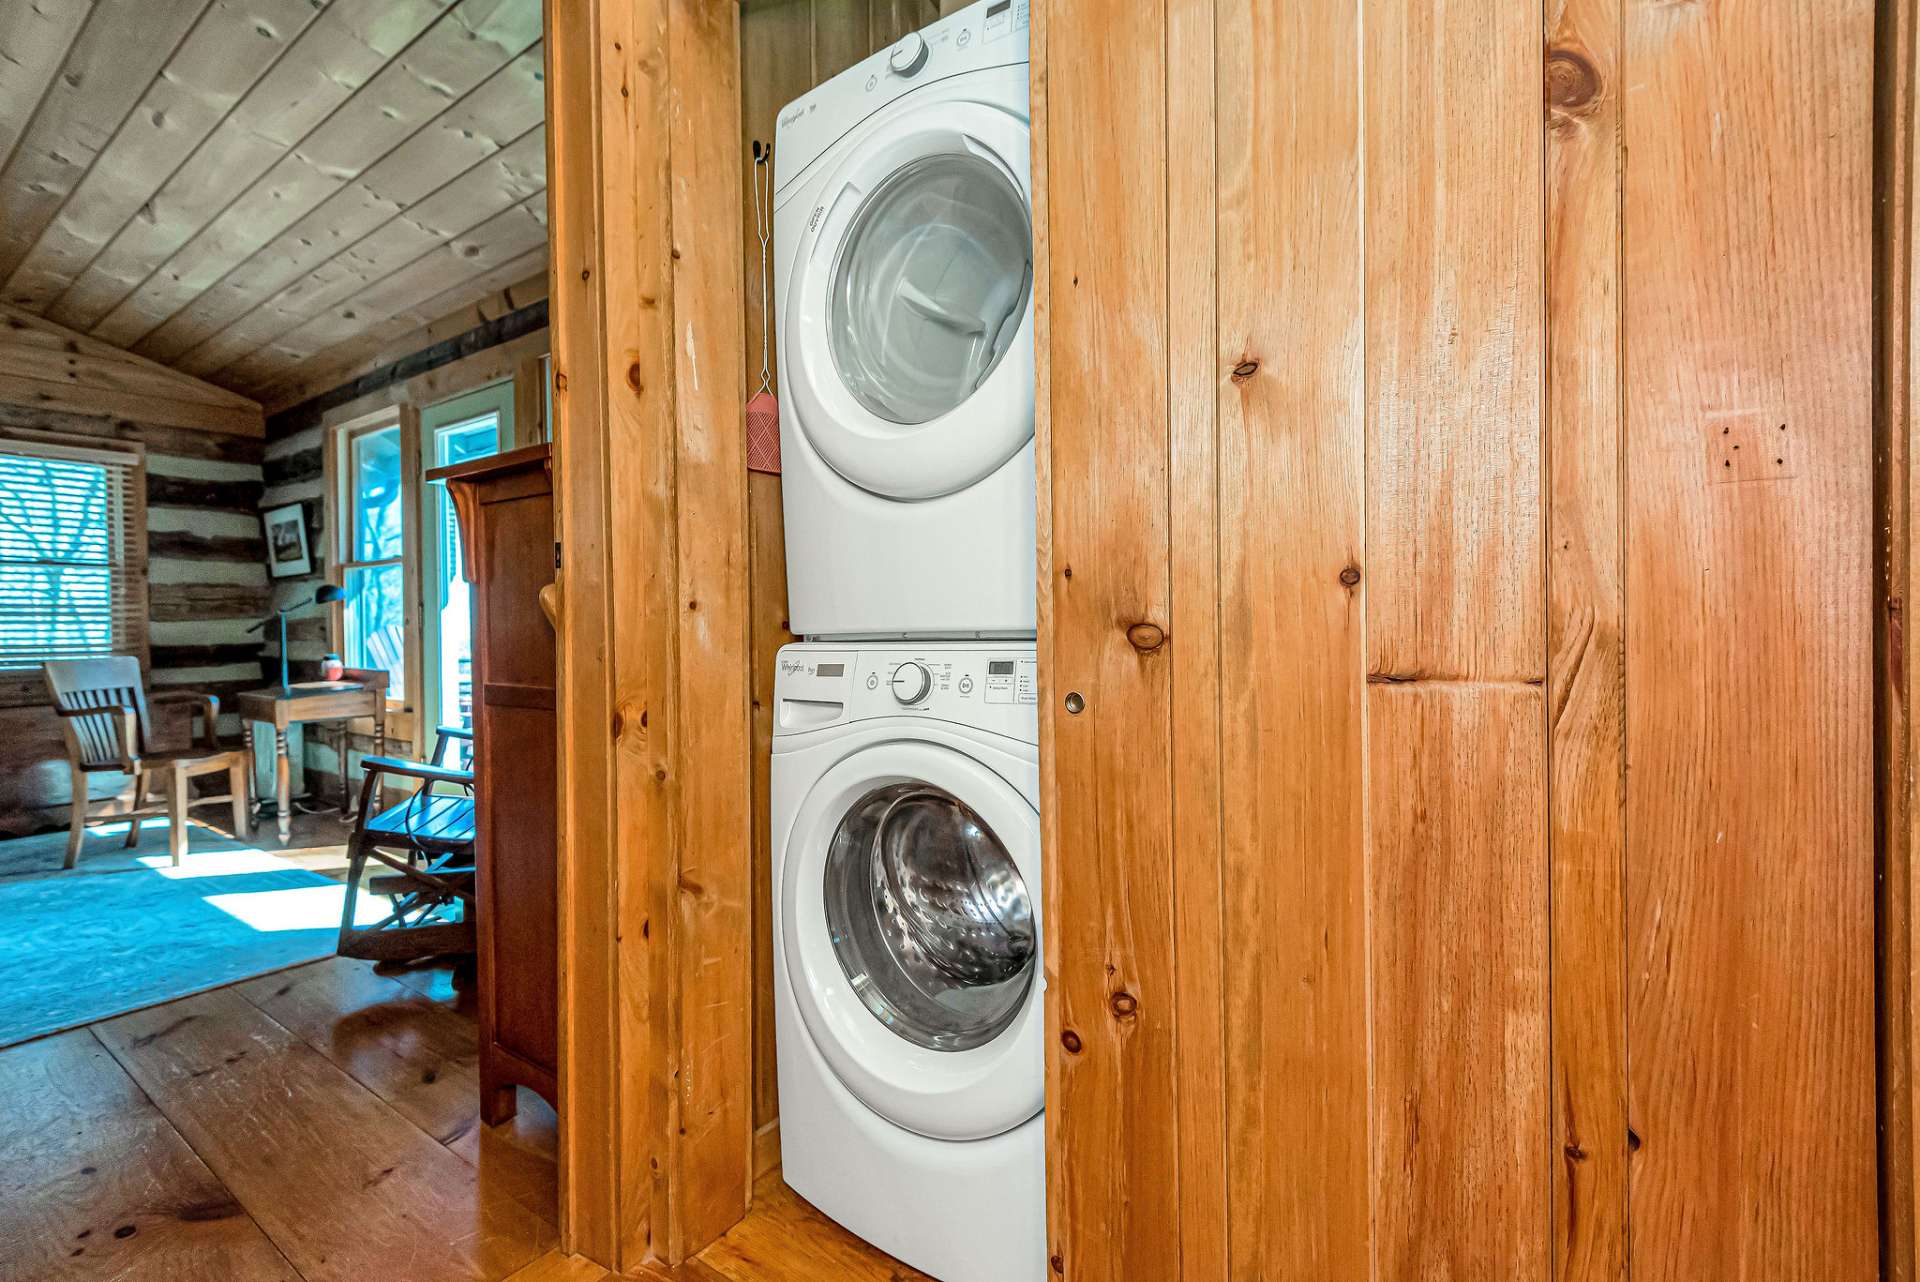 The laundry closet is conveniently located in the hall and offers additional storage.